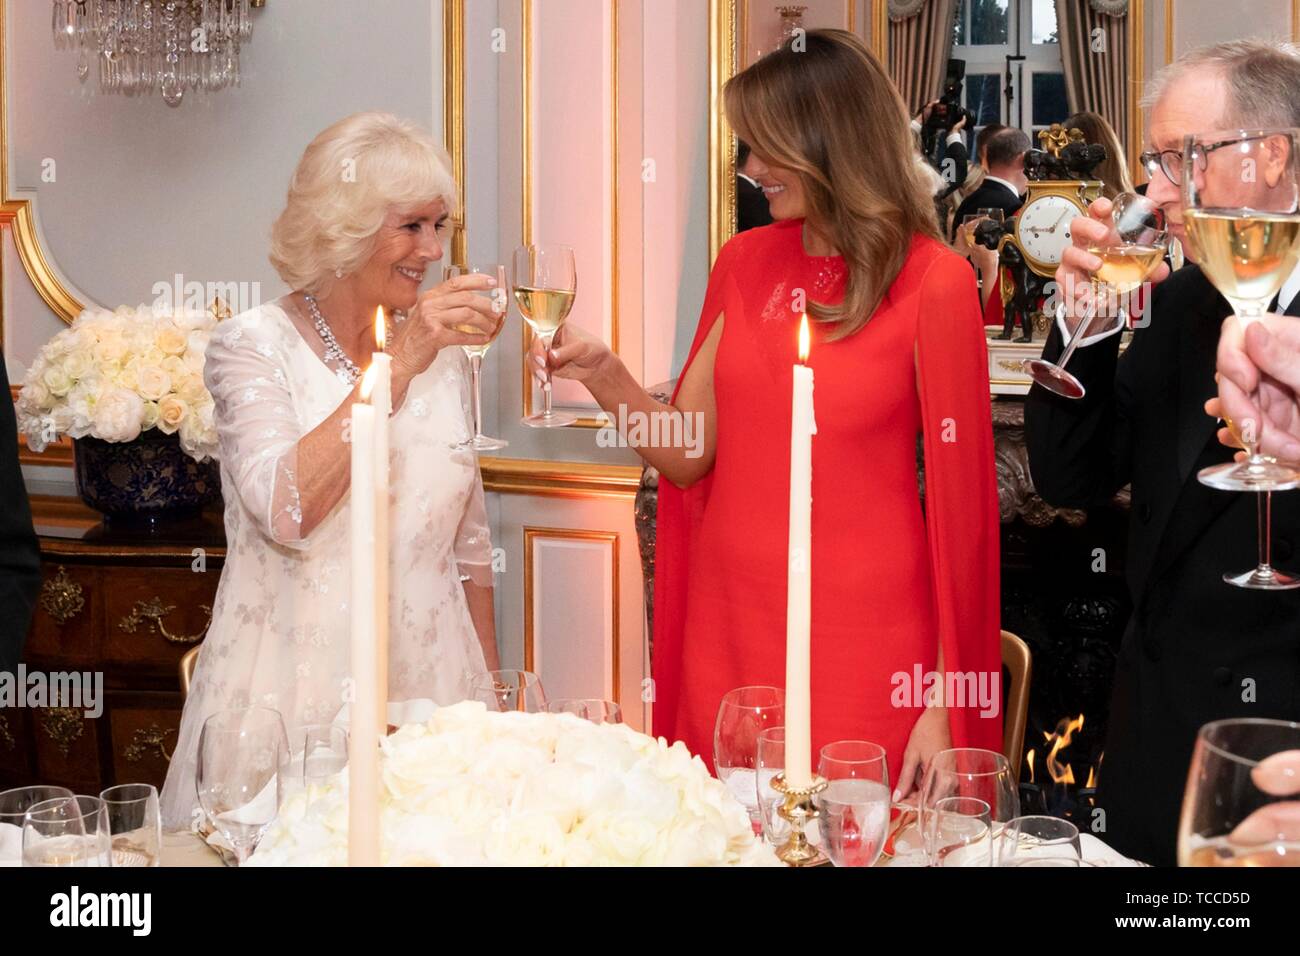 U.S First Lady Melania Trump toasts with the Duchess of Cornwall during a gala at Winfield House hosted by the Trumps June 4, 2019 in London, England. Stock Photo